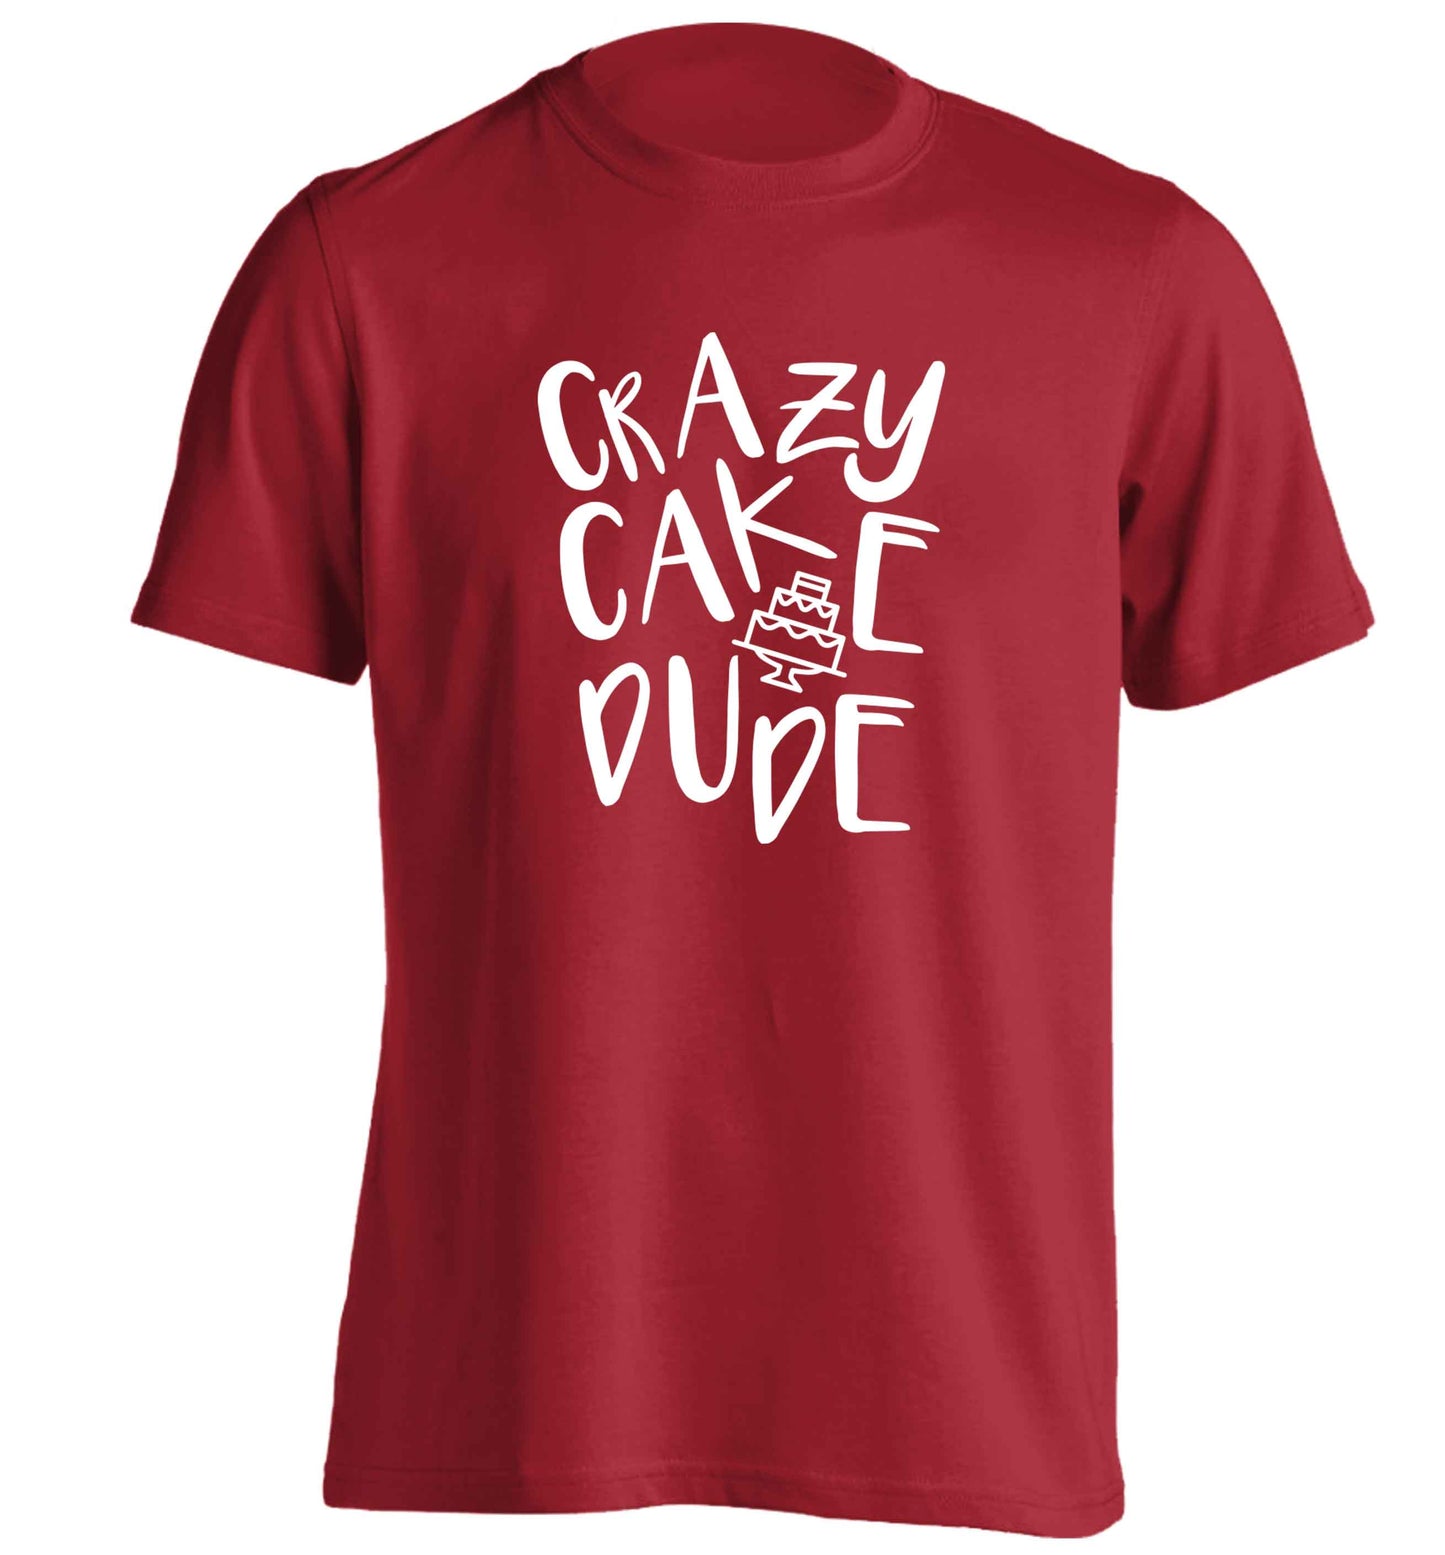 Crazy cake dude adults unisex red Tshirt 2XL